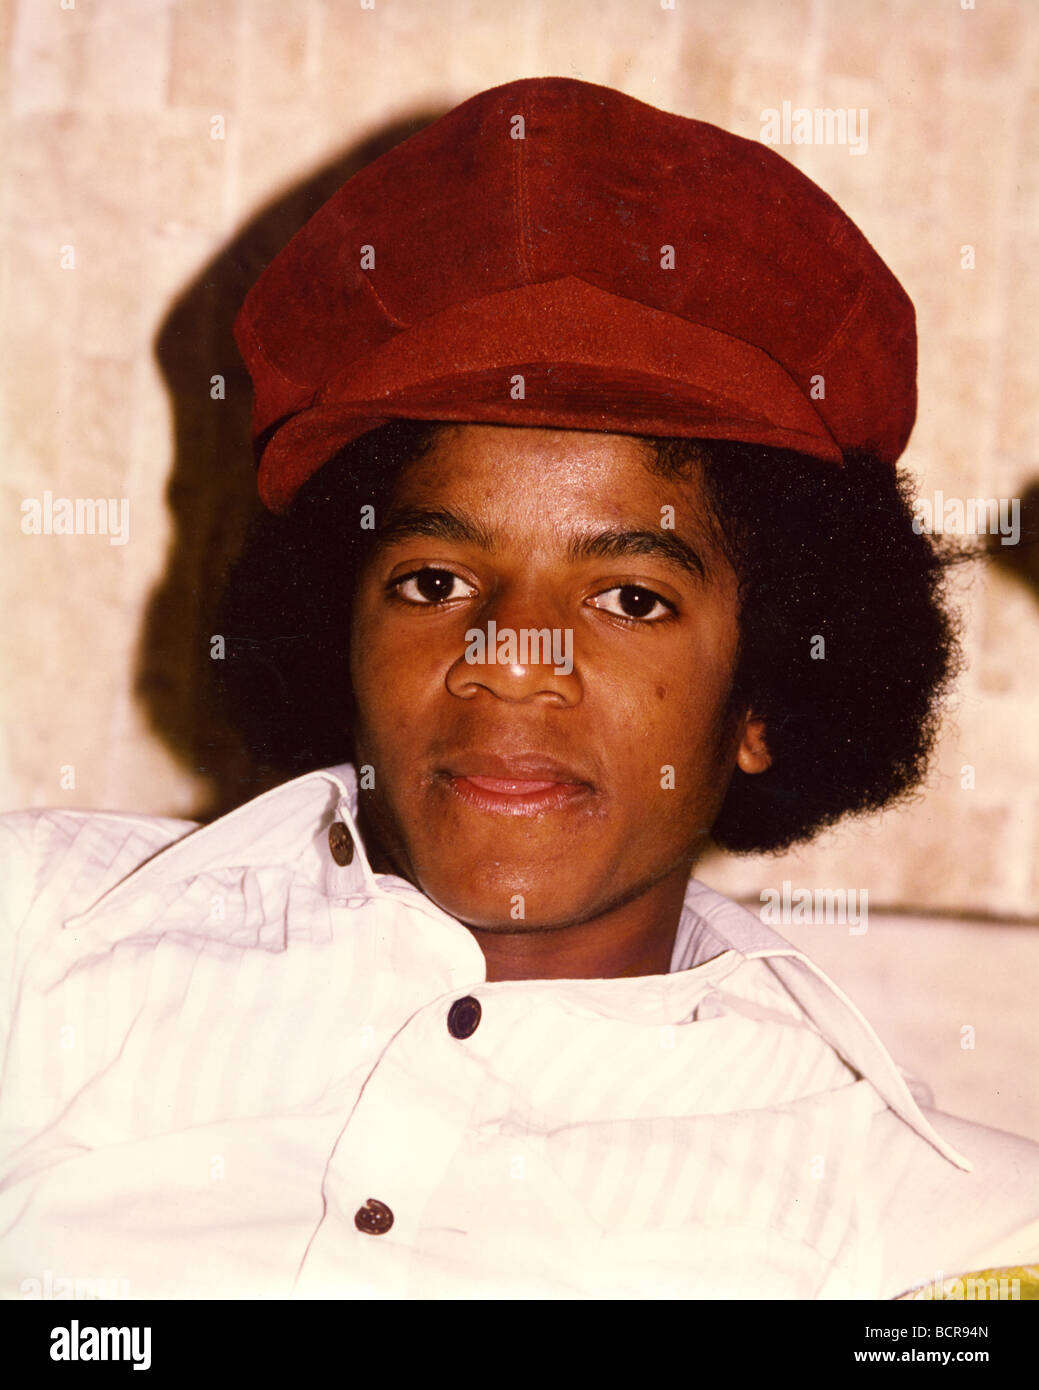 Michael jackson history cd hi-res stock photography and images - Alamy